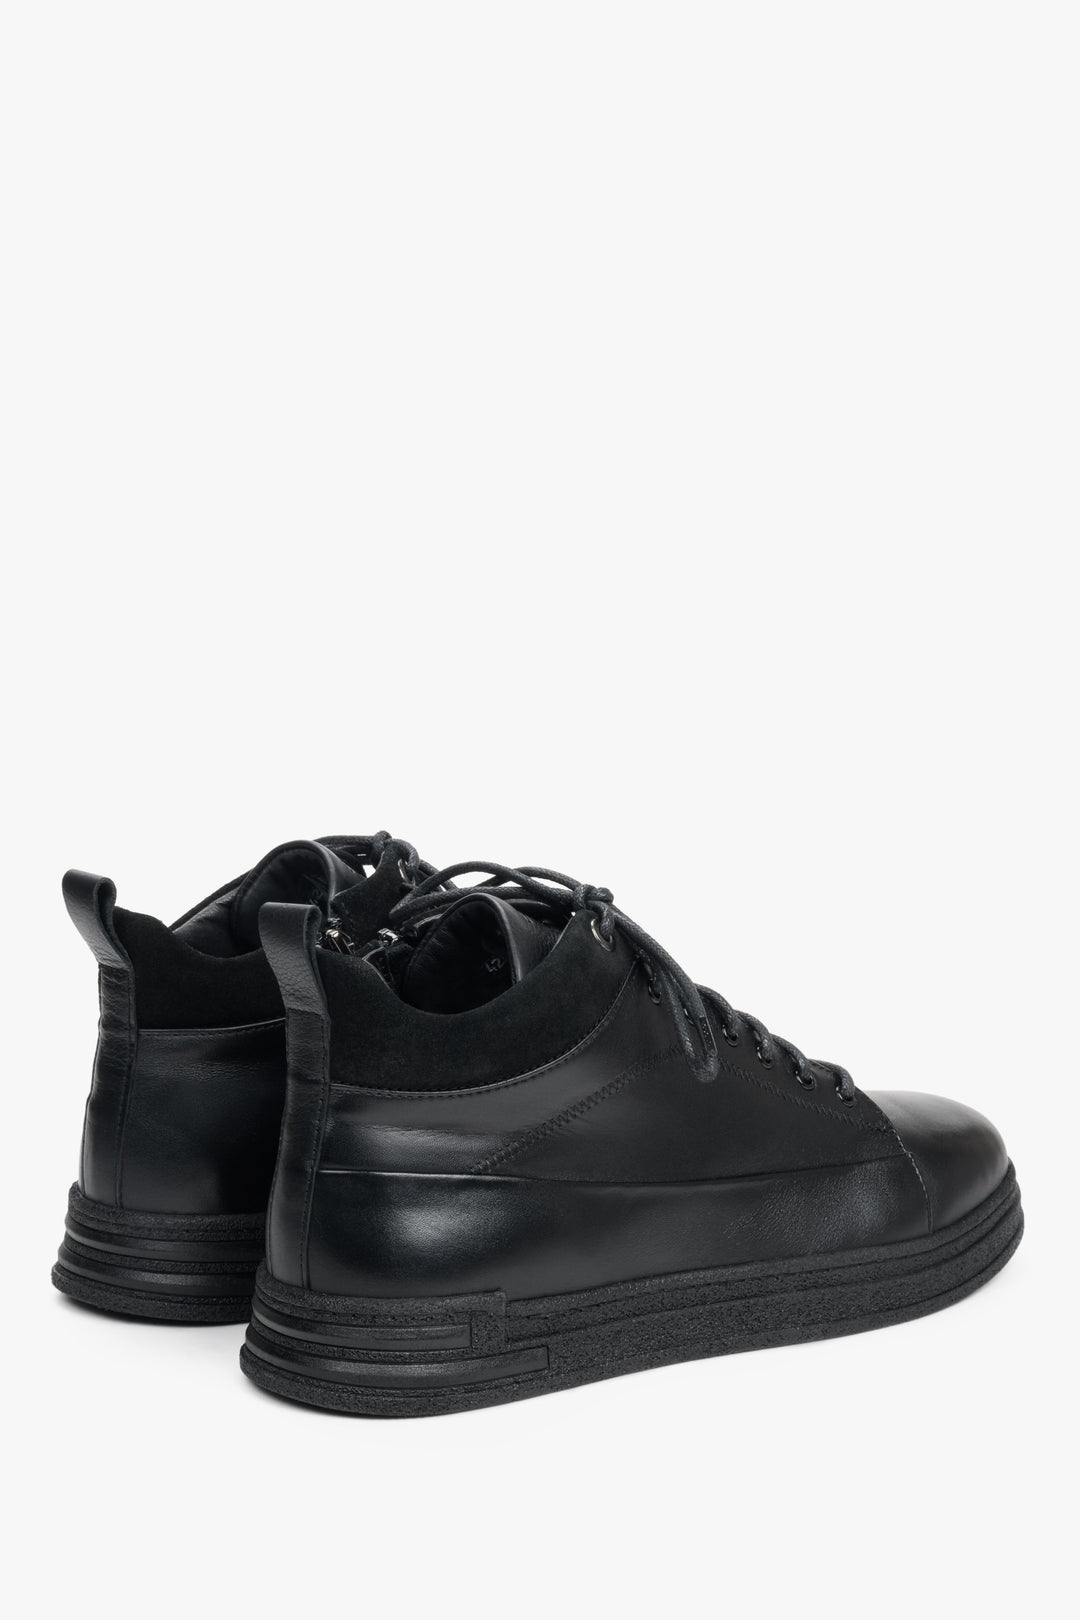 High-top black men's sneakers made of genuine leather by Estro with a zipper - close-up on the heel of the shoe.